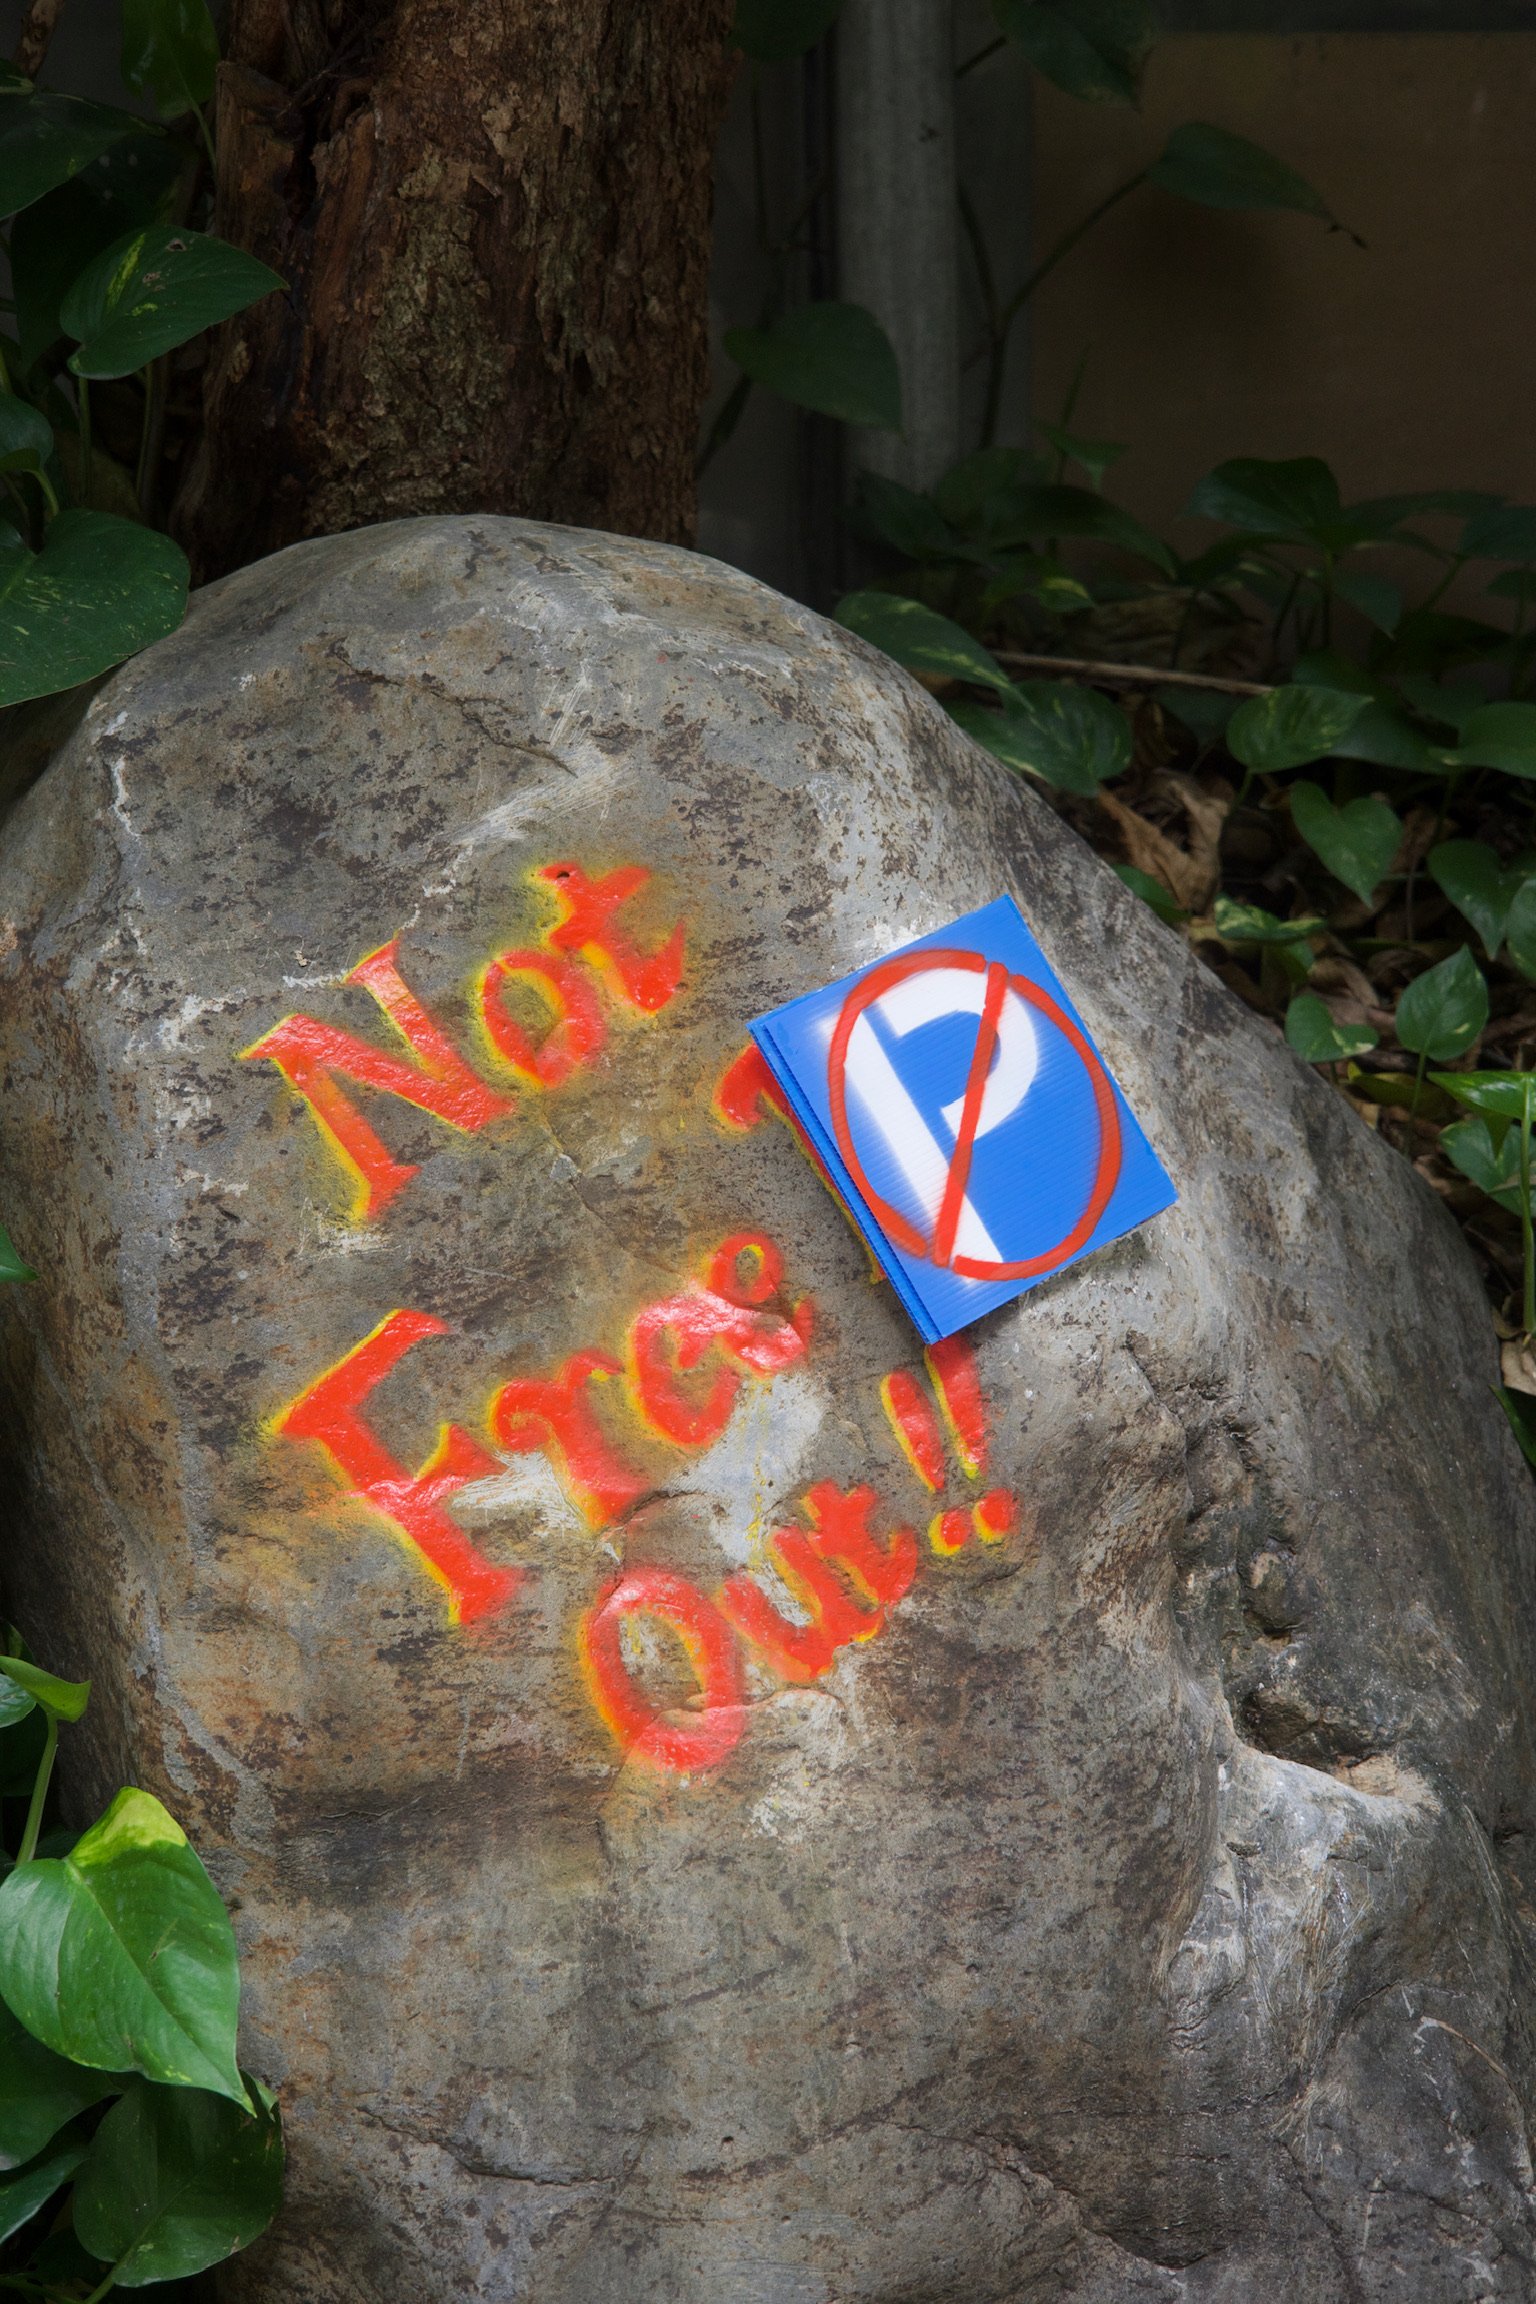 A big rock (about 2 meters) with a no parking sign attached, and orange text graffiti reading “Not Free (P) Out!!” with yellow text shadow.